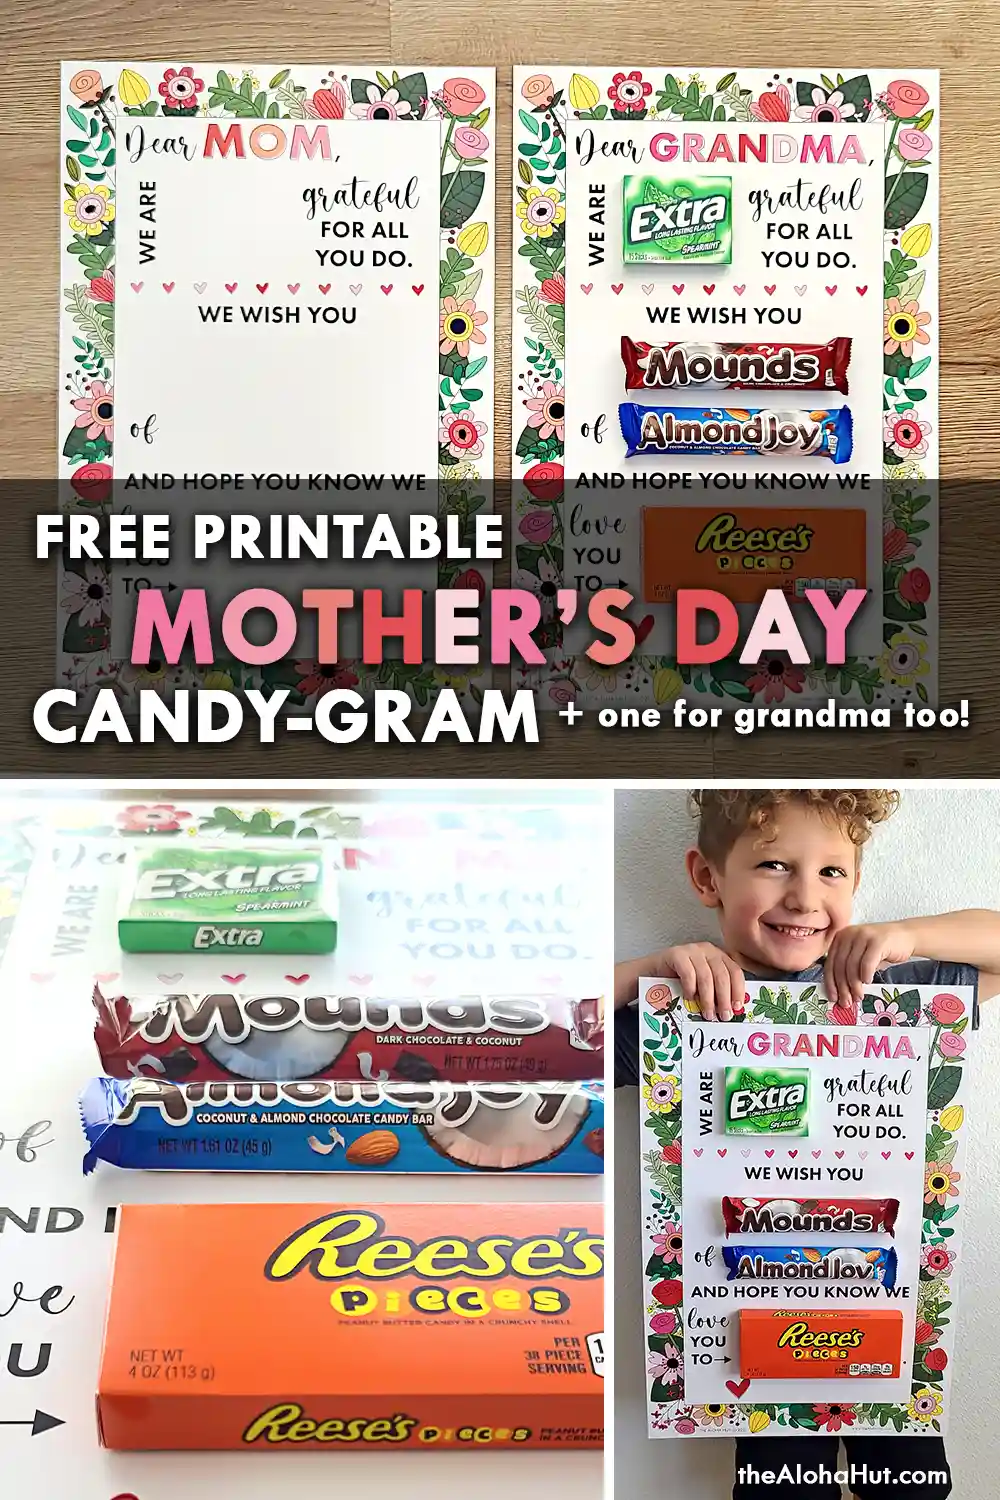 Mother's Day Card Candy-Gram - Poster - free printable